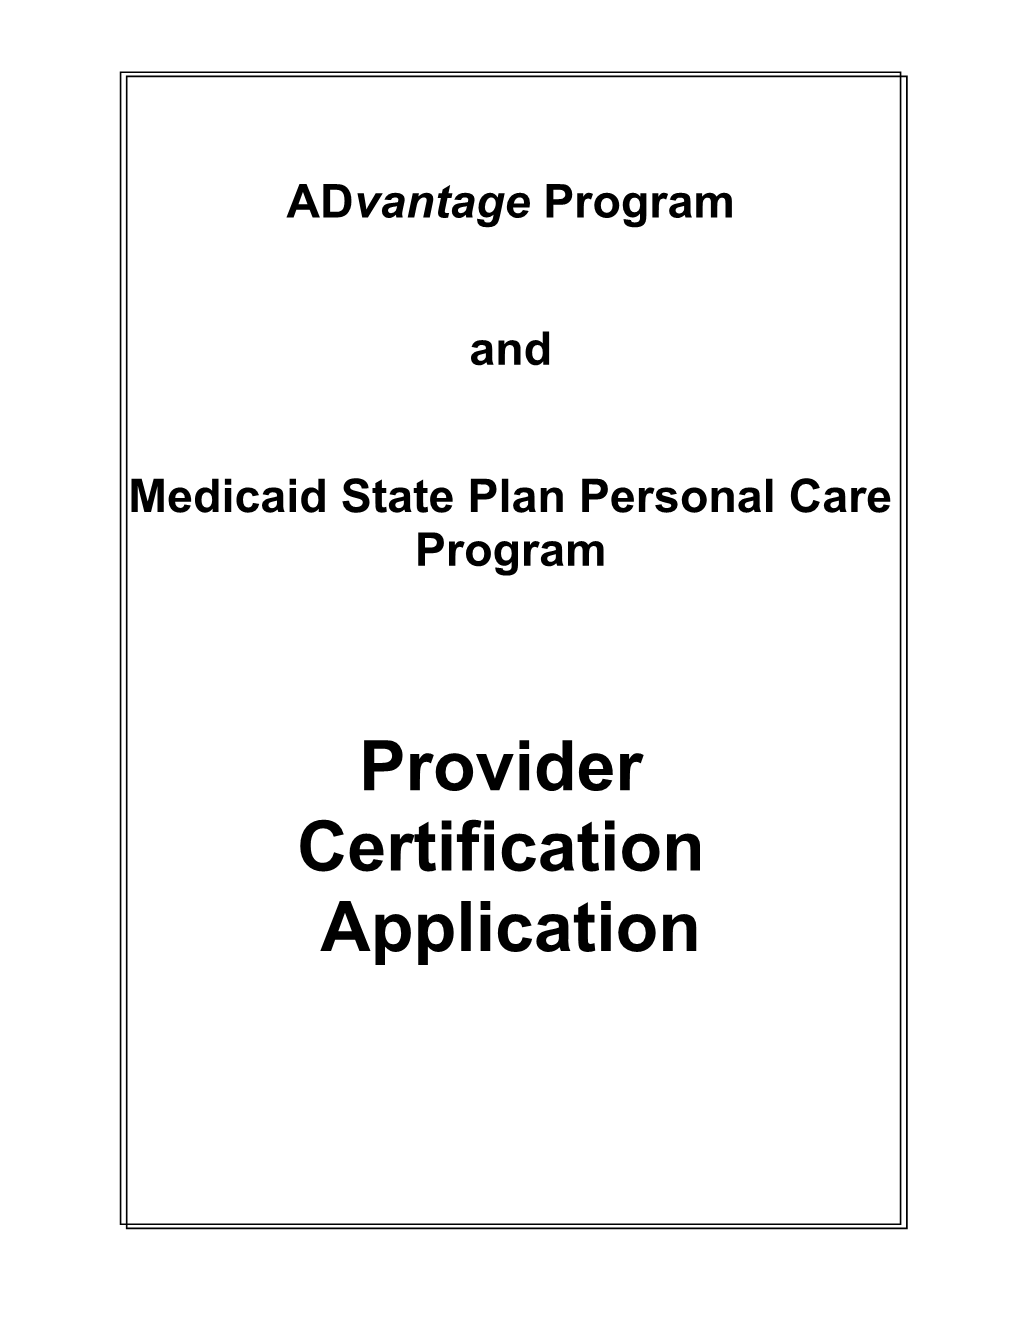 Medicaid State Plan Personal Care Program